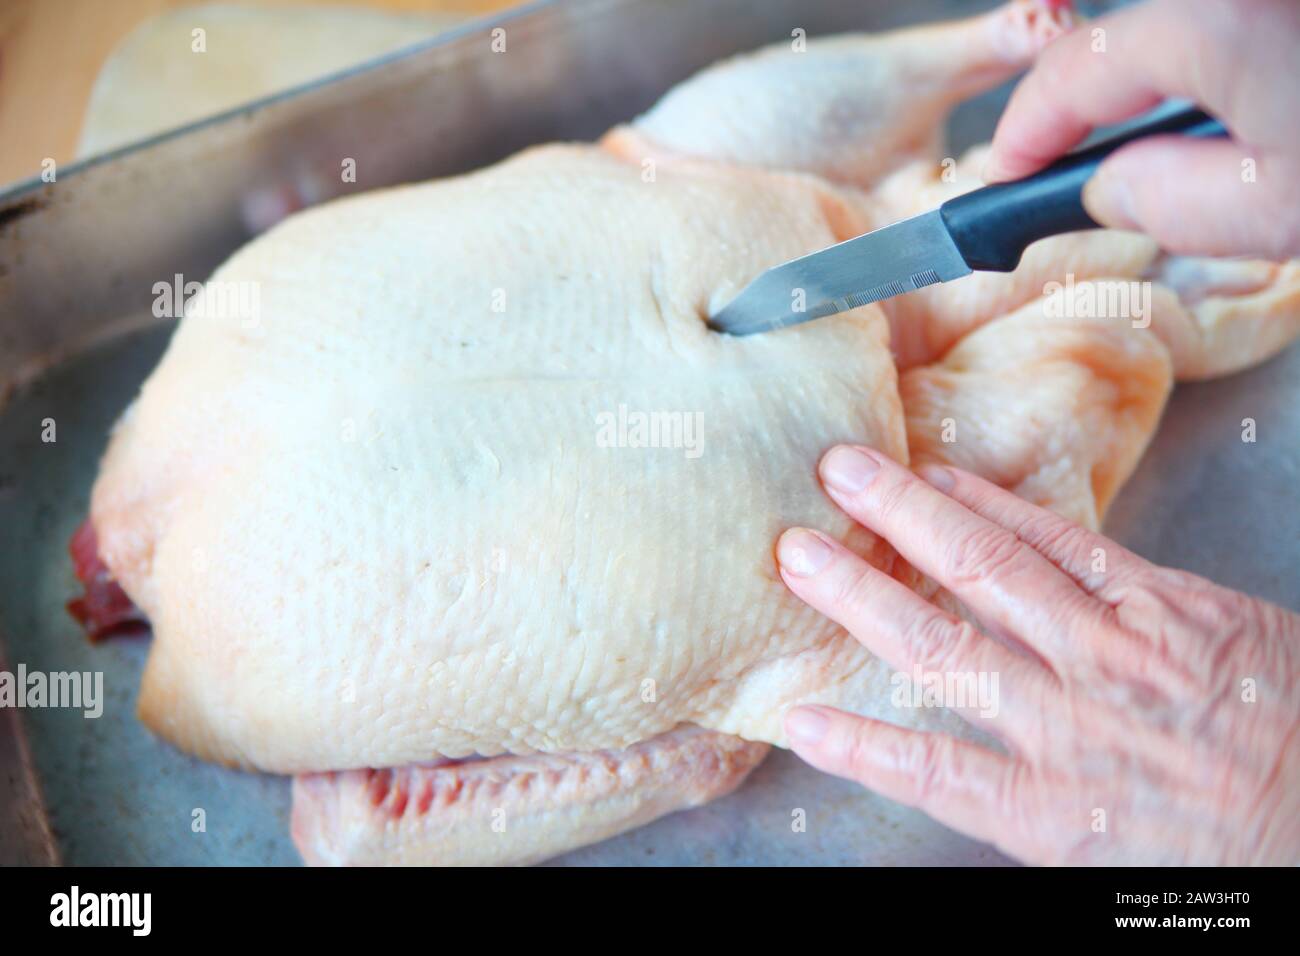 A woman pierces a duck’s skin to allow excess fat to drain during roasting Stock Photo